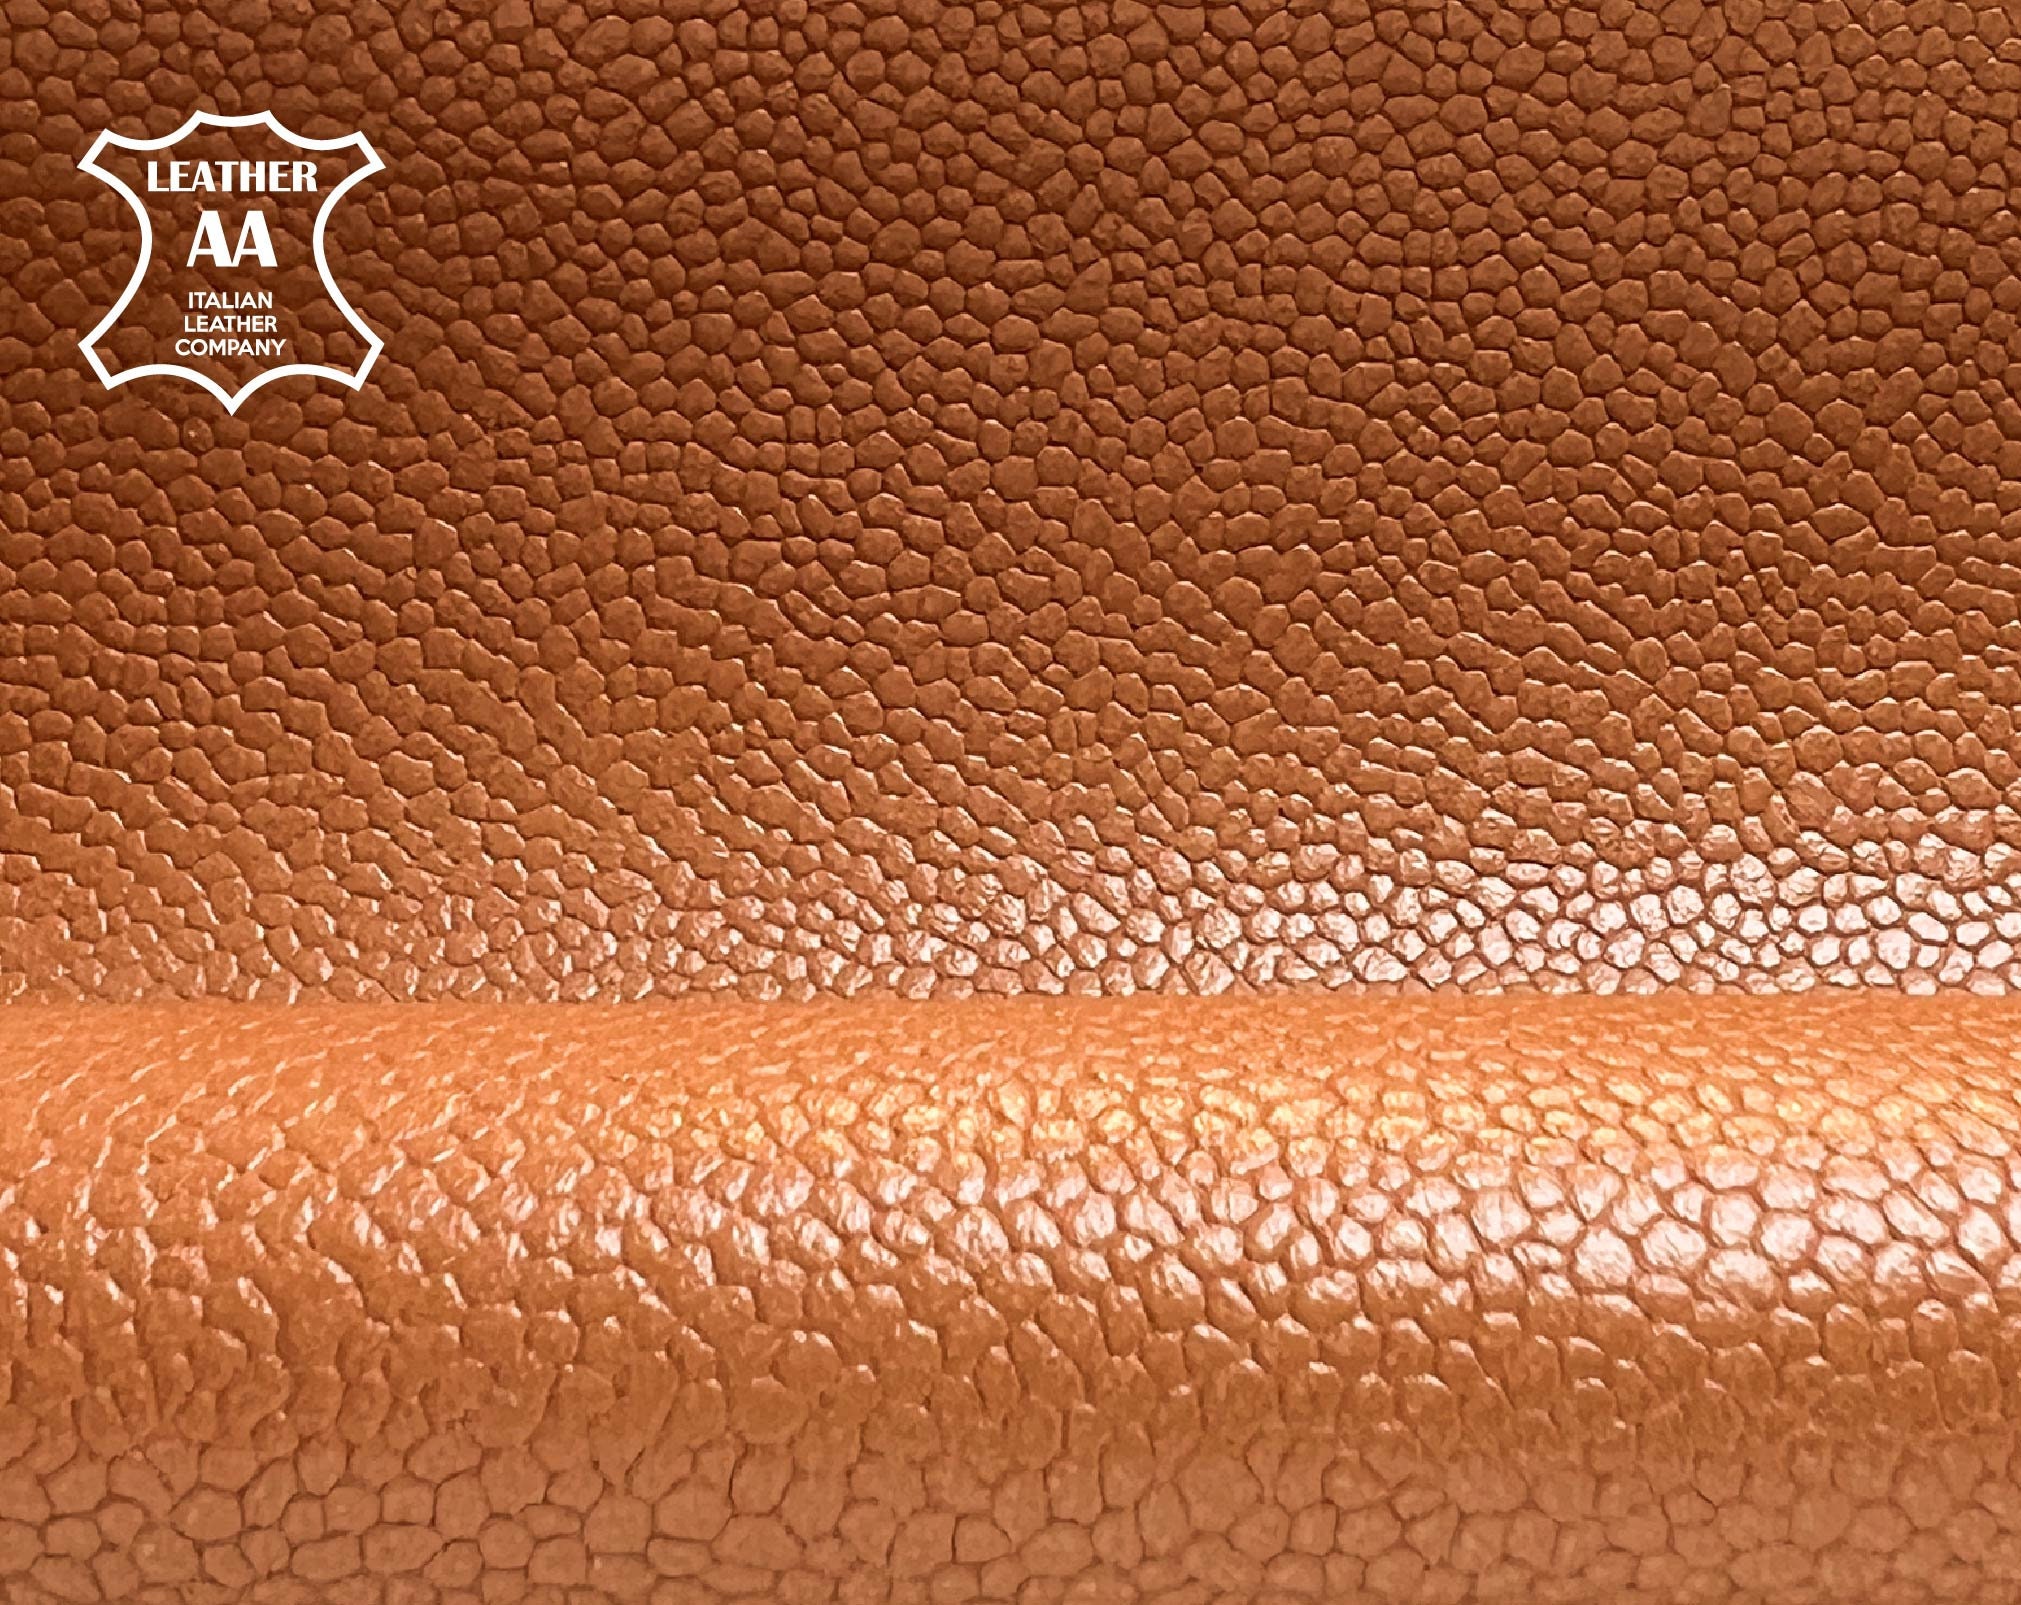 Brown Lambskin Leather With Pebbled Texture 0.46 0.9 M2 // 5 